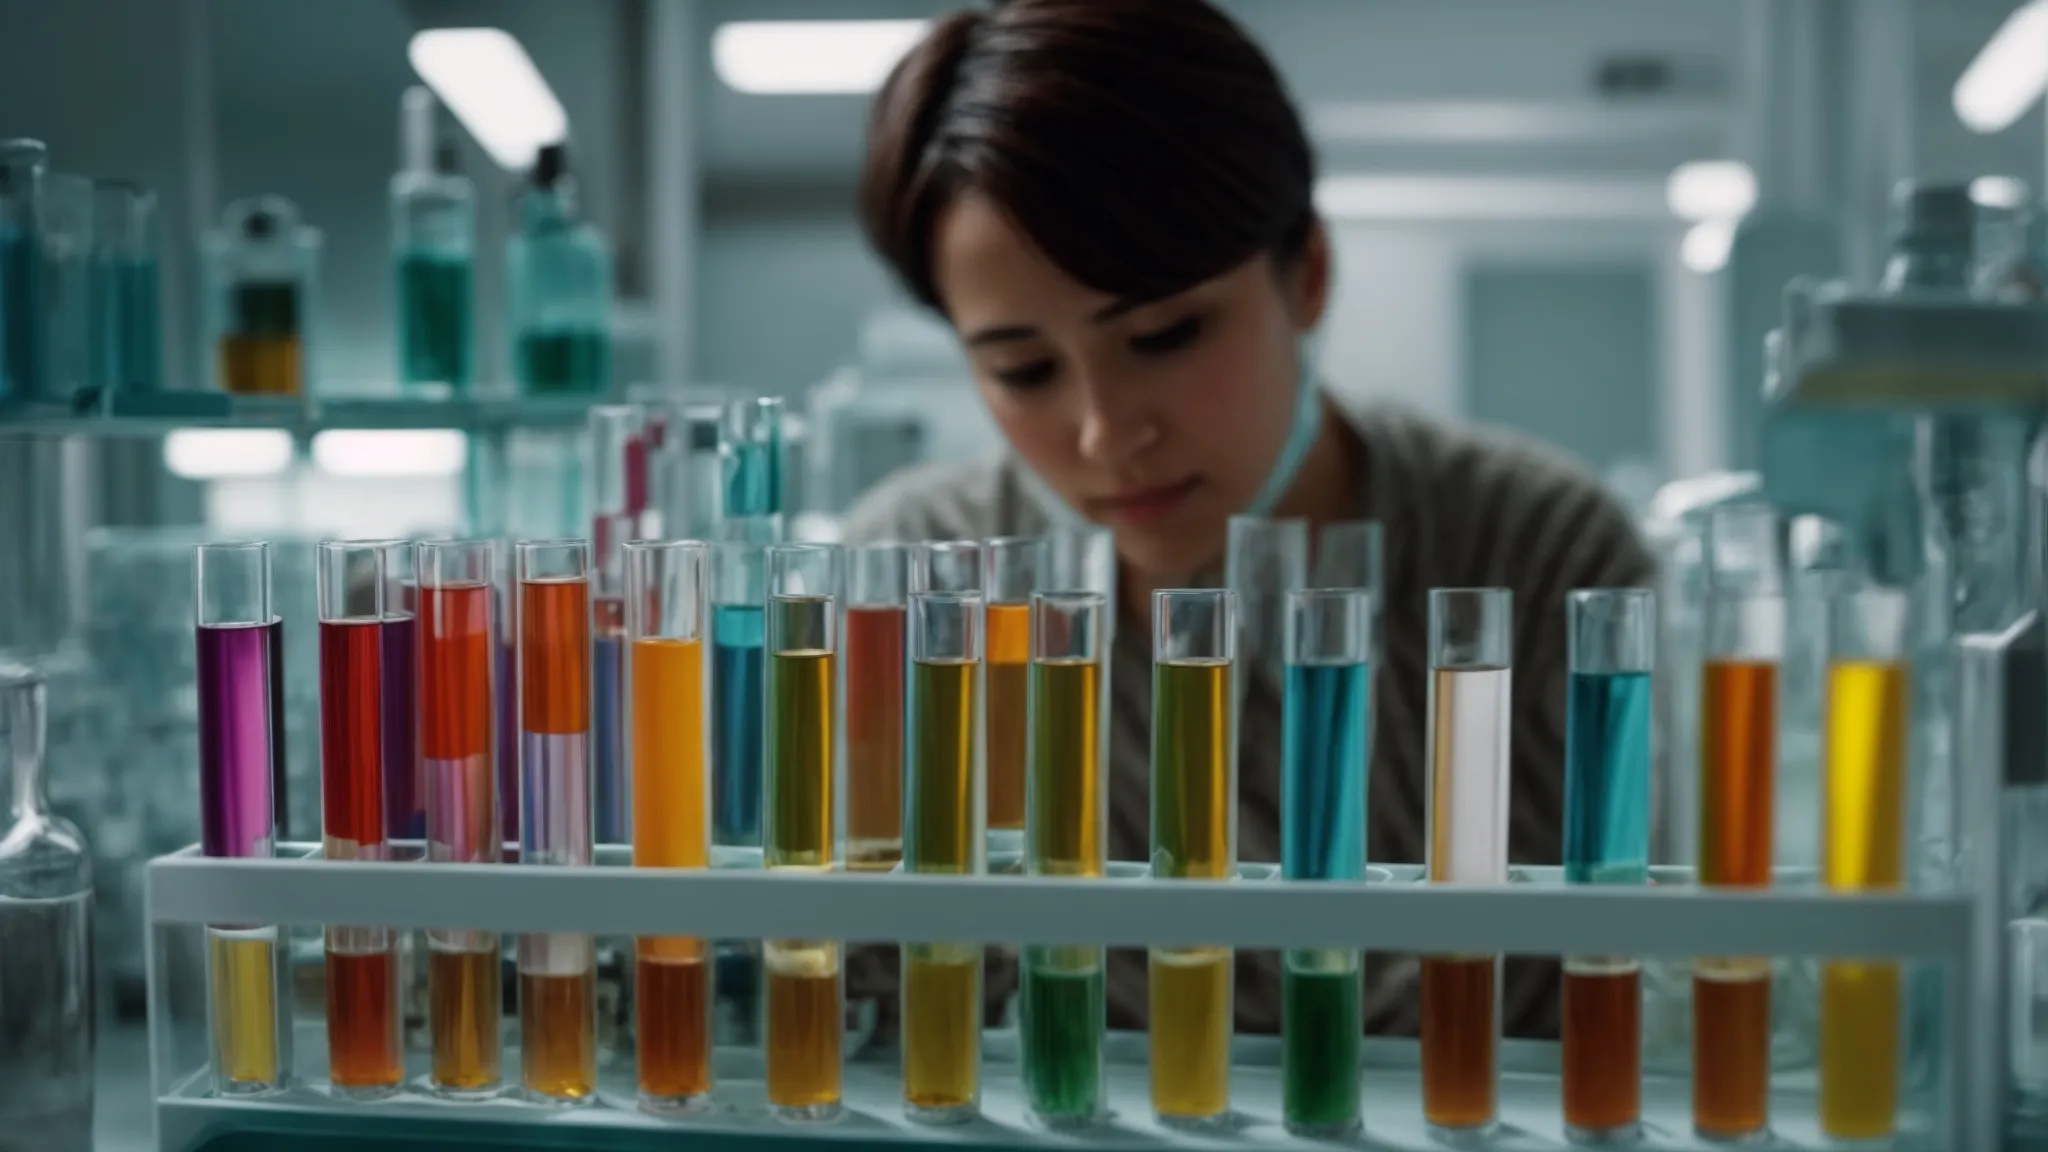 a person examines test tubes filled with colorful liquids in a bright laboratory.